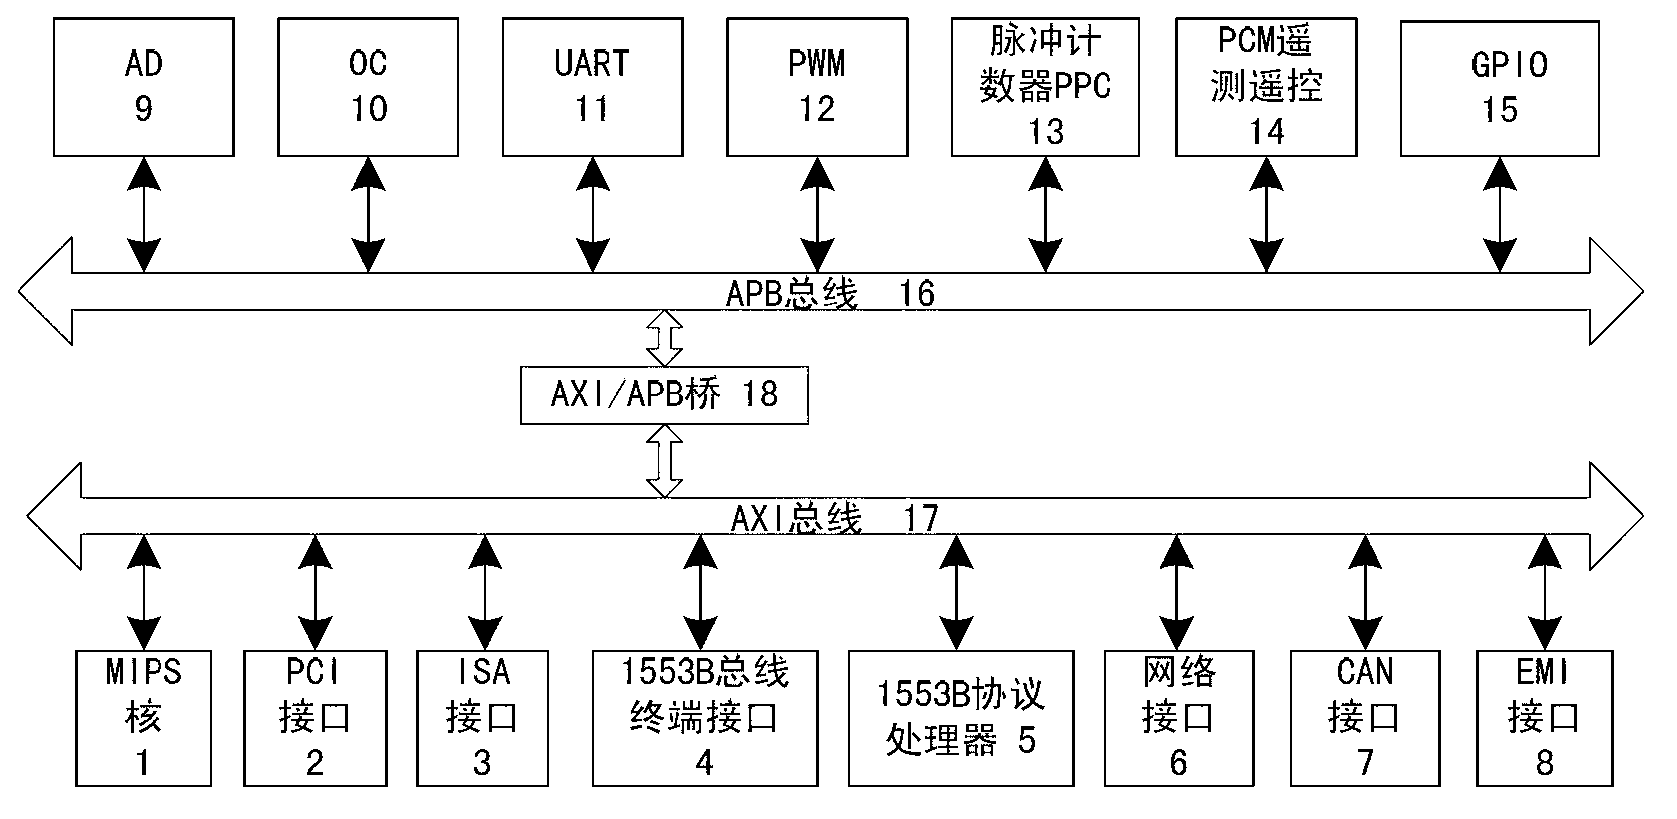 Special ASIC (Application Specific Integrated Circuit) chip system for spaceflight